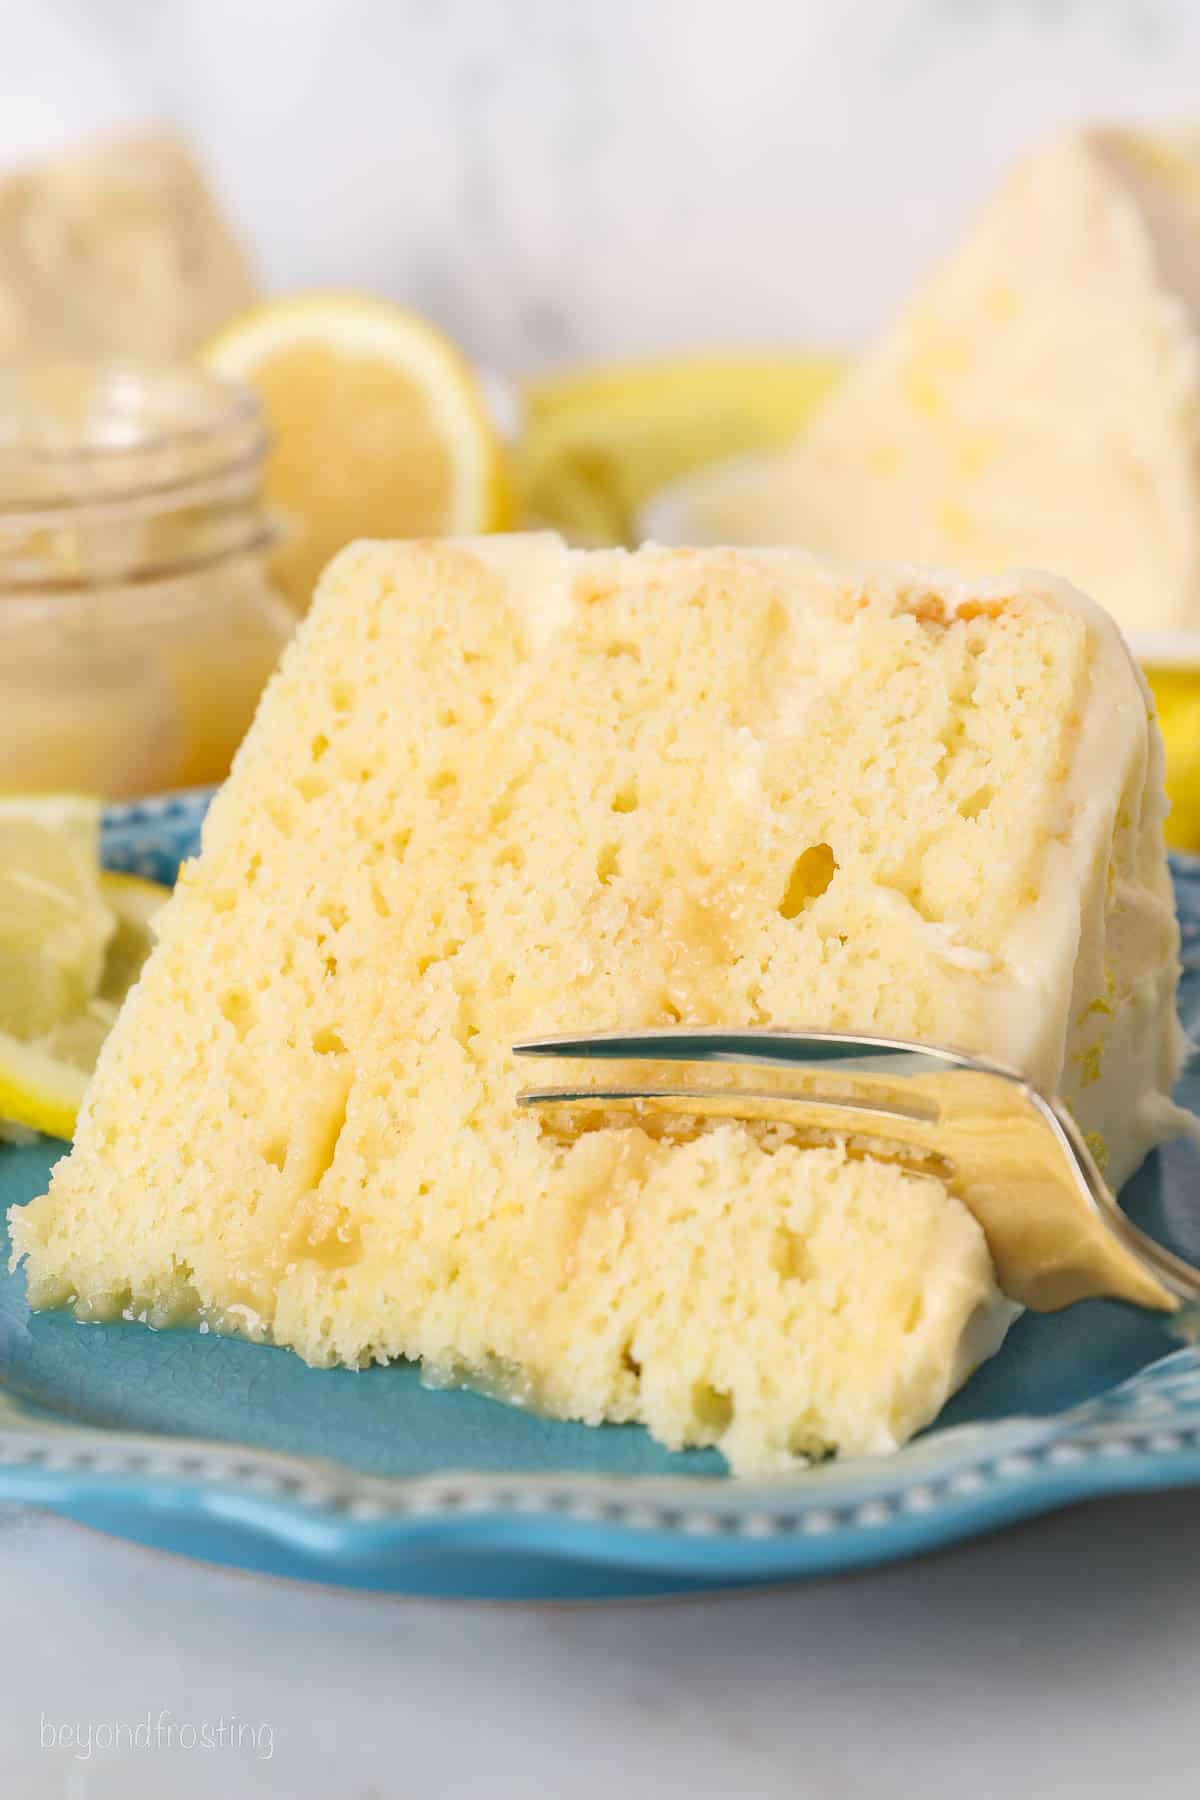 A fork cuts into the corner of a slice of lemon layer cake on a blue plate.